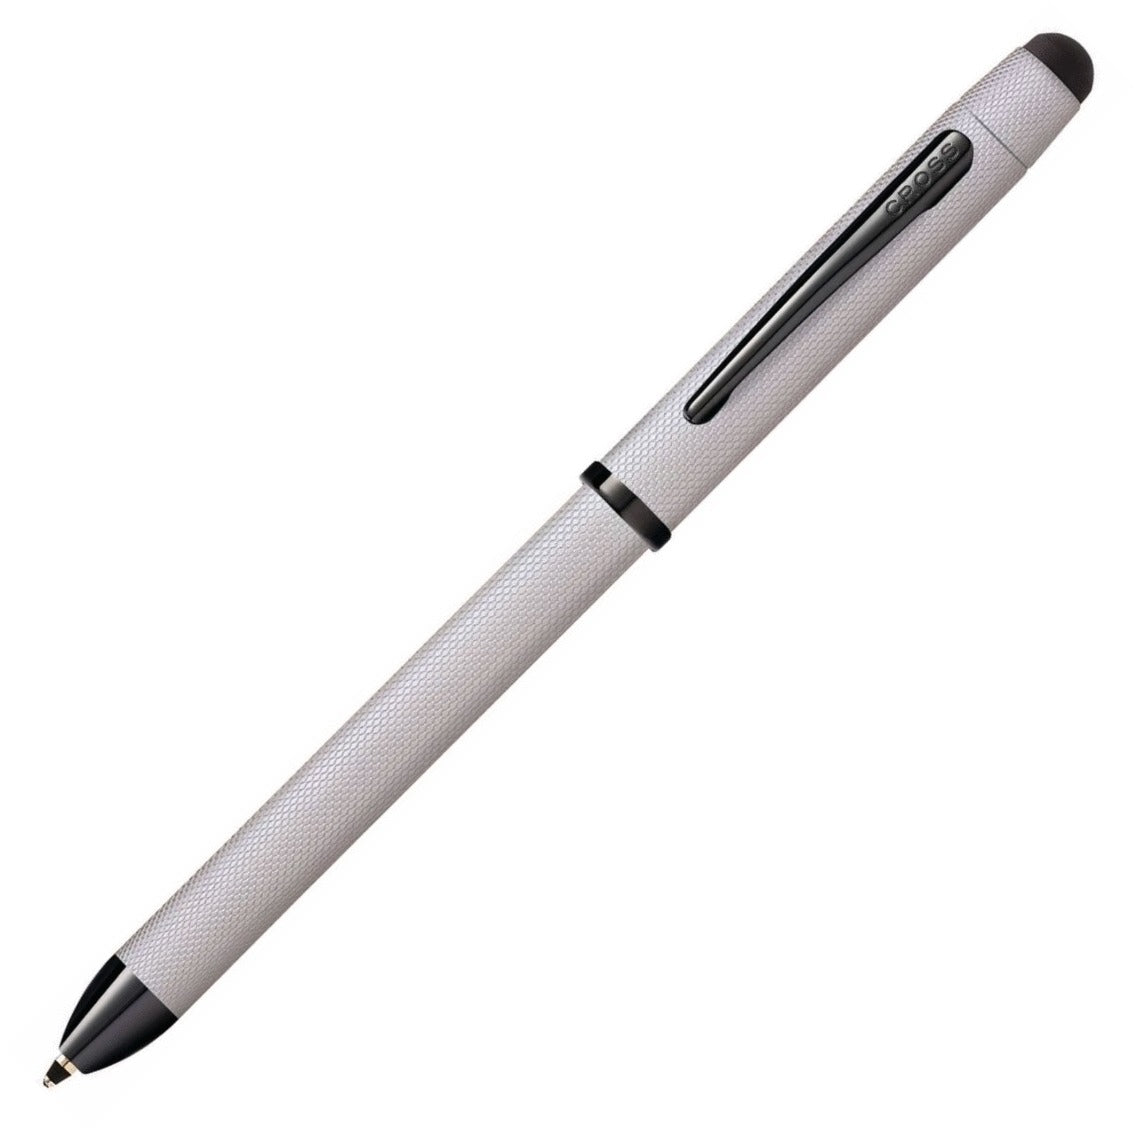 Cross Tech3 Brushed Chrome MultiFunction Pen | AT0090-21 | Pen Place